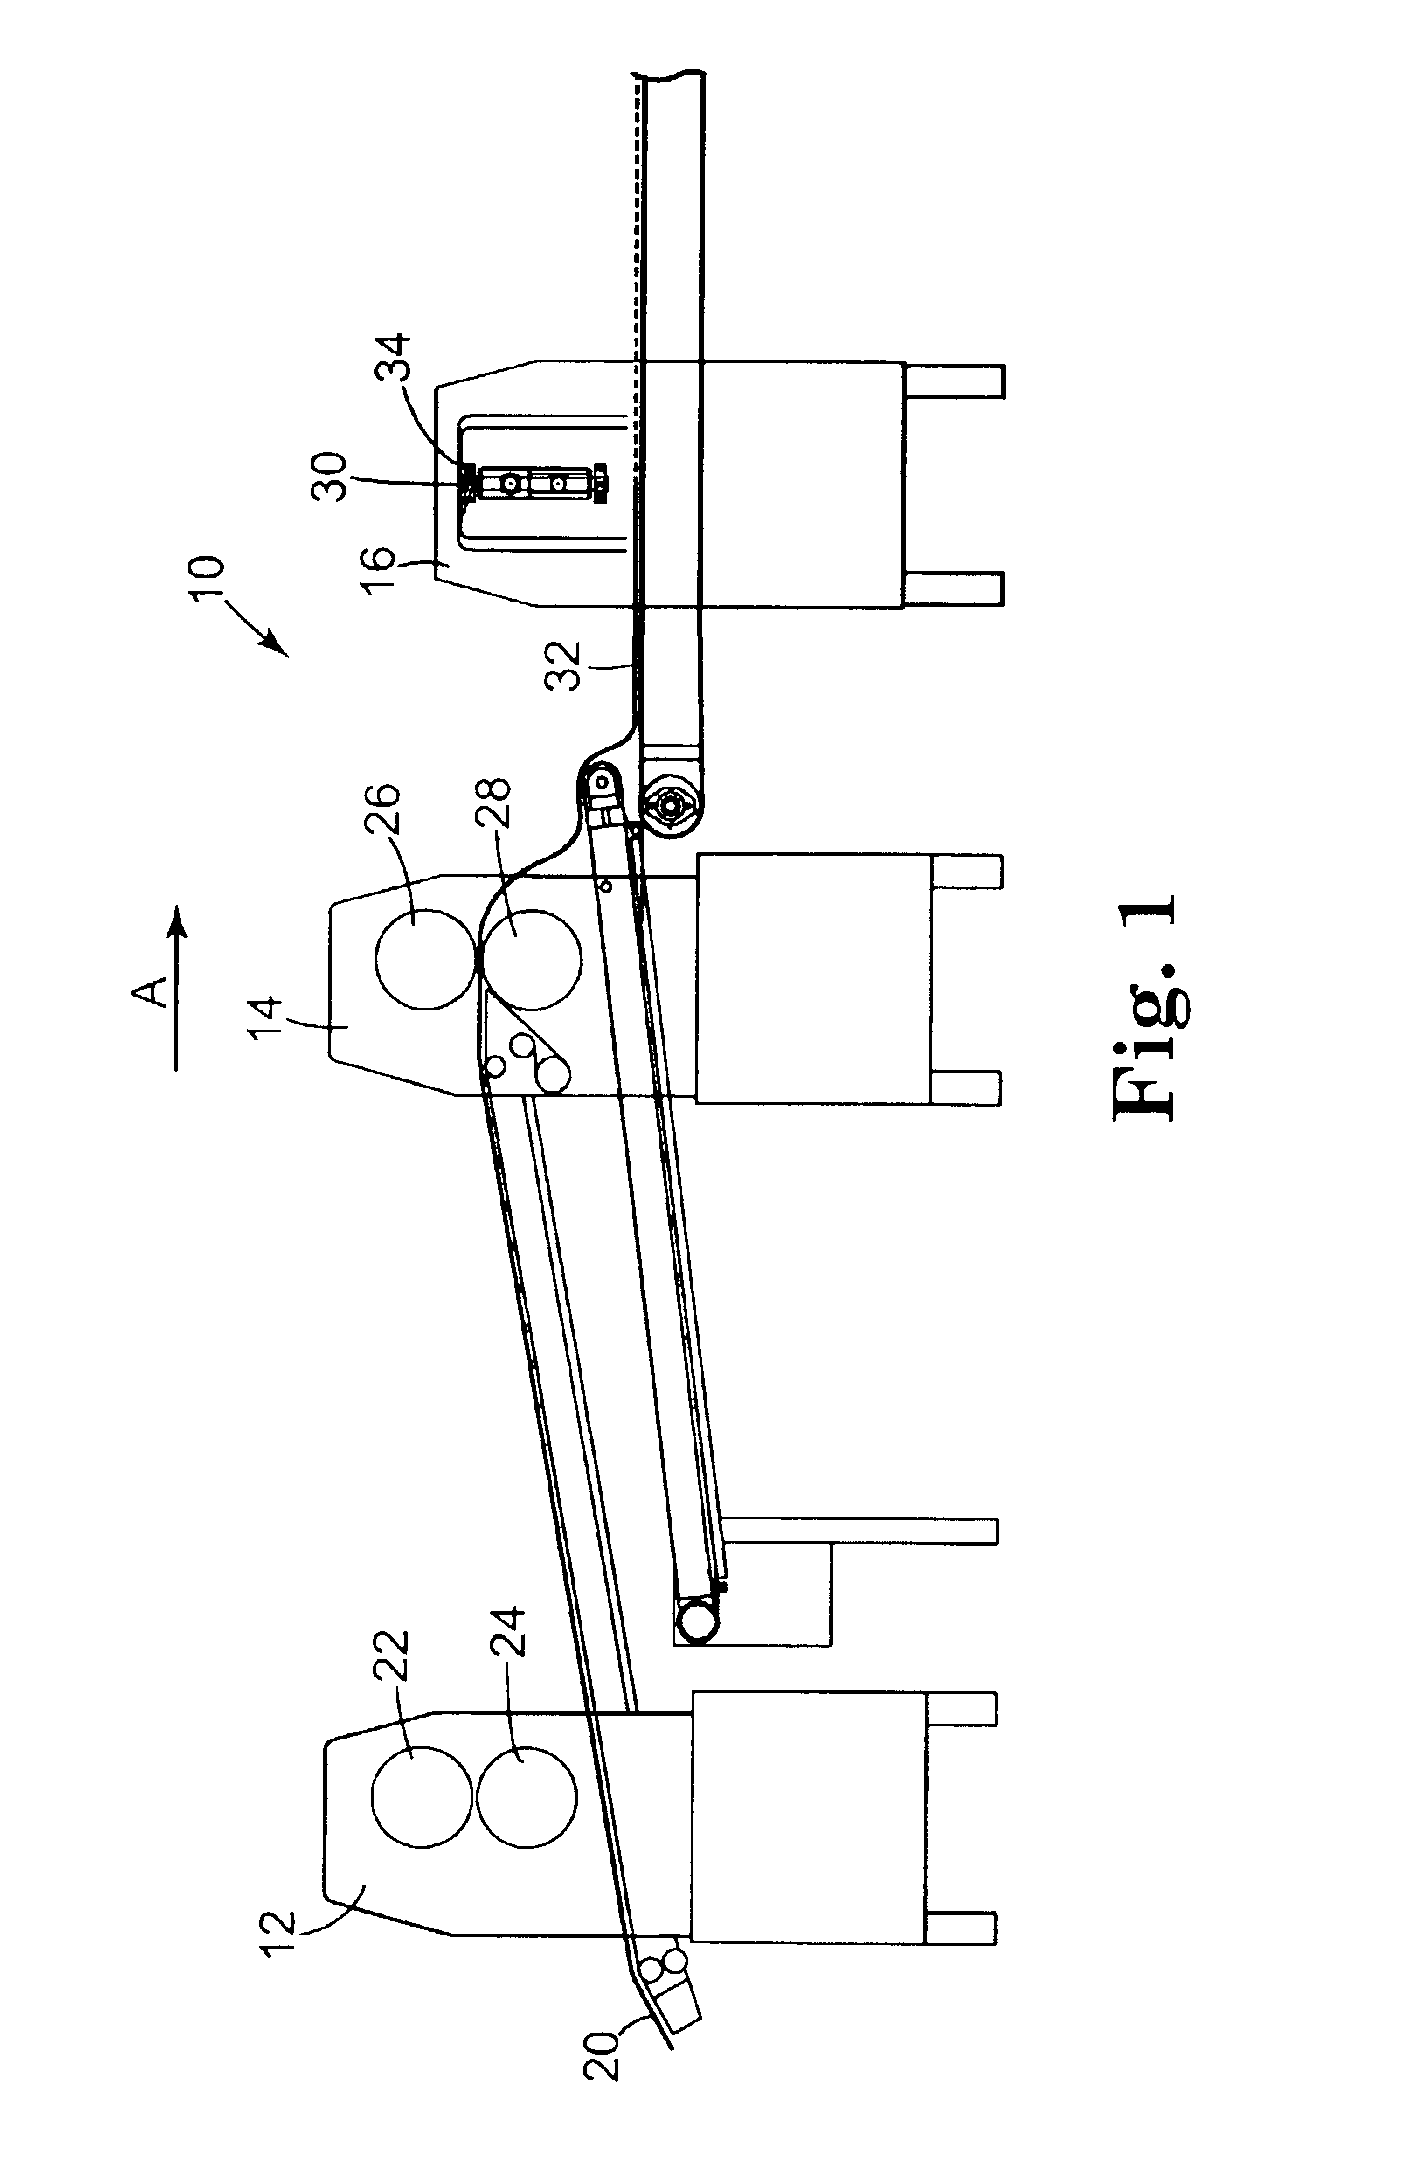 Method and apparatus for cutting dough with nested pattern cutters